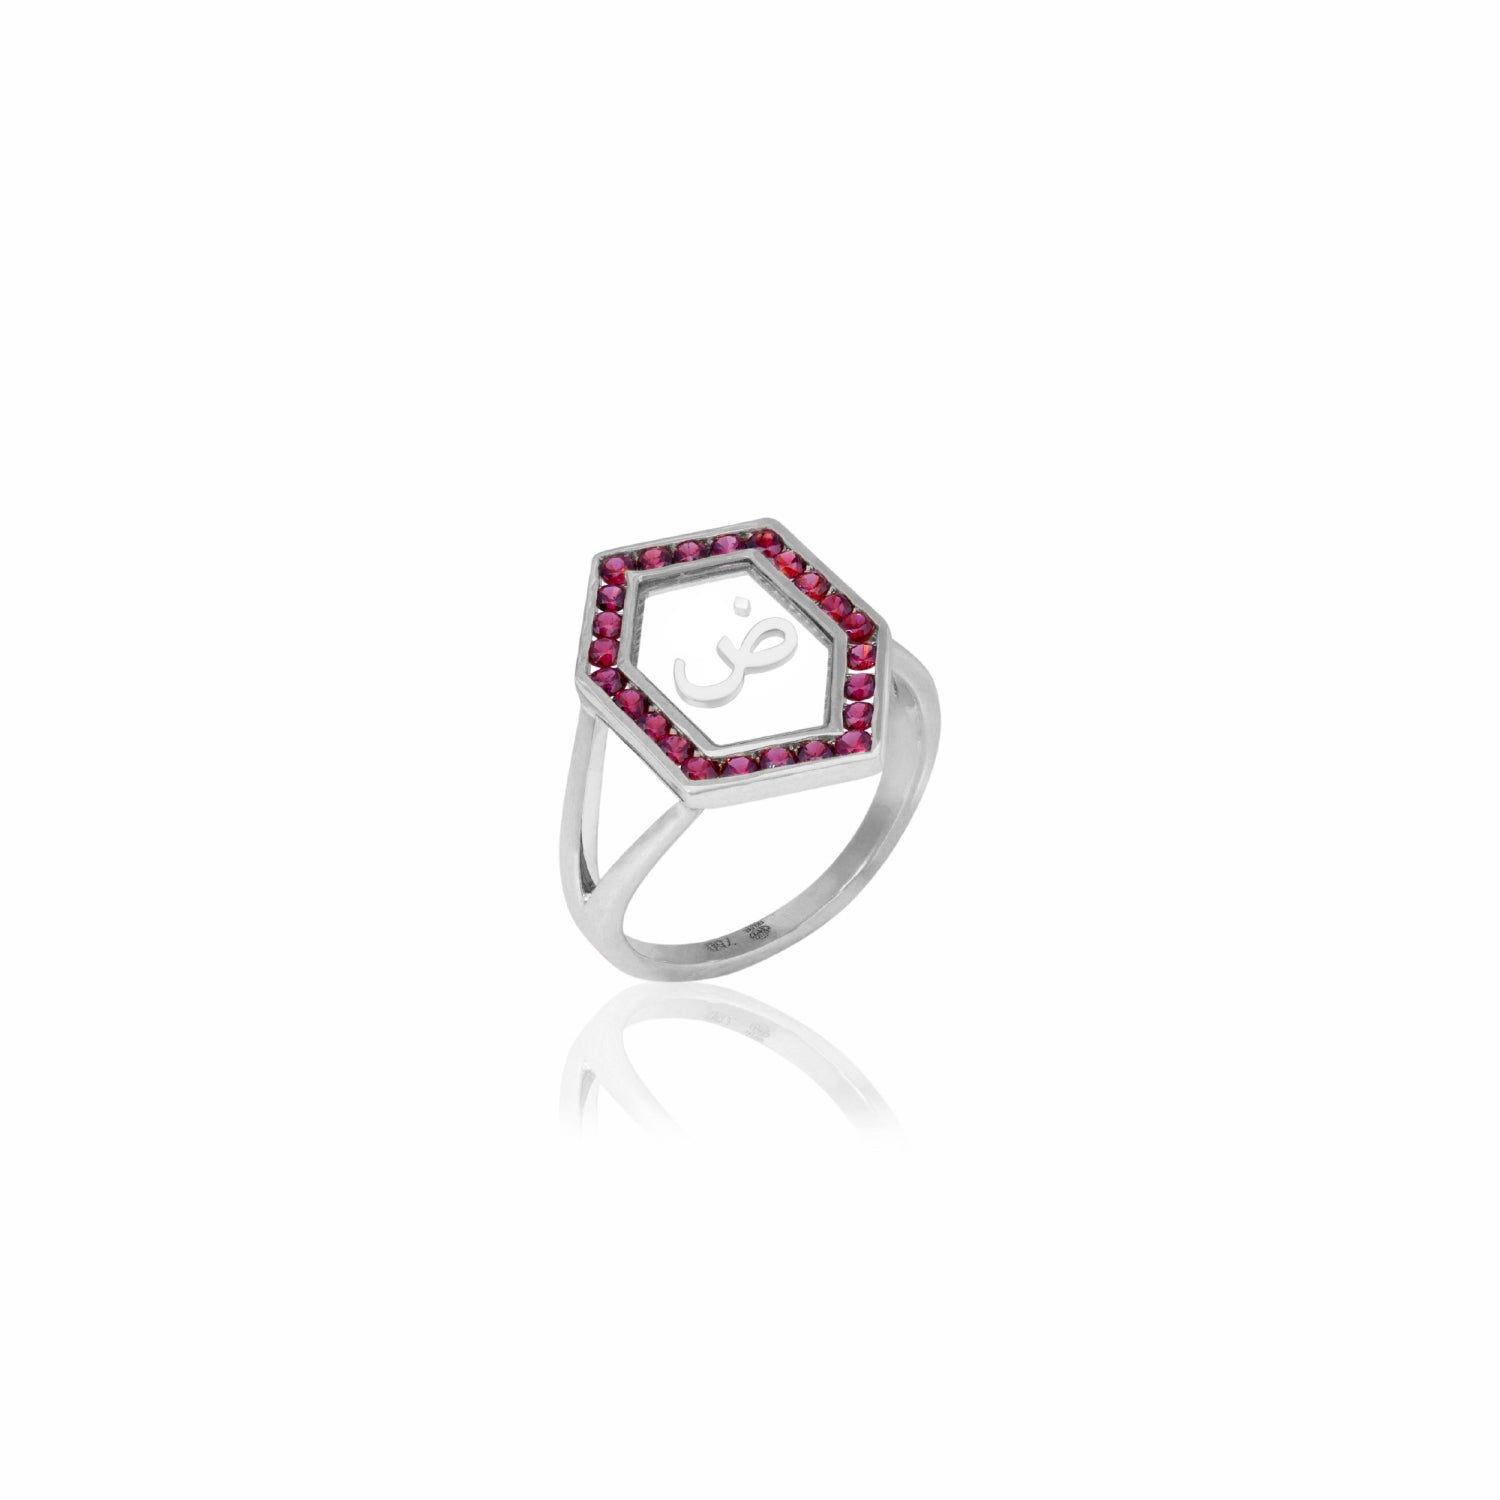 Qamoos 1.0 Letter ض Ruby Ring in White Gold